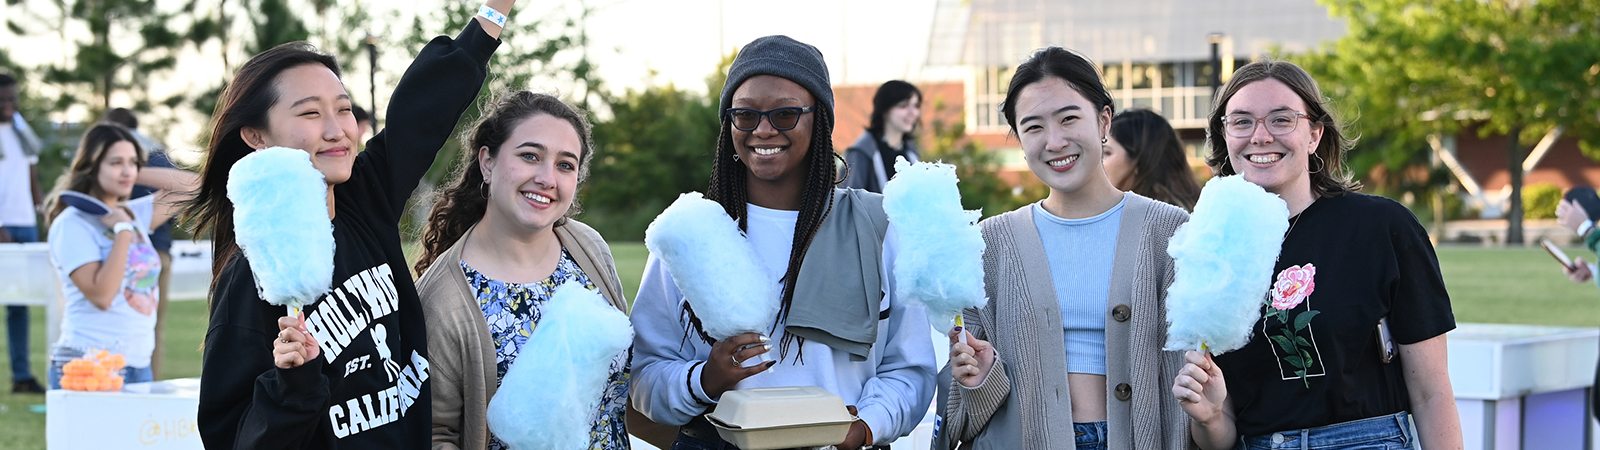 UNF students posing for a group photo with cotton candy